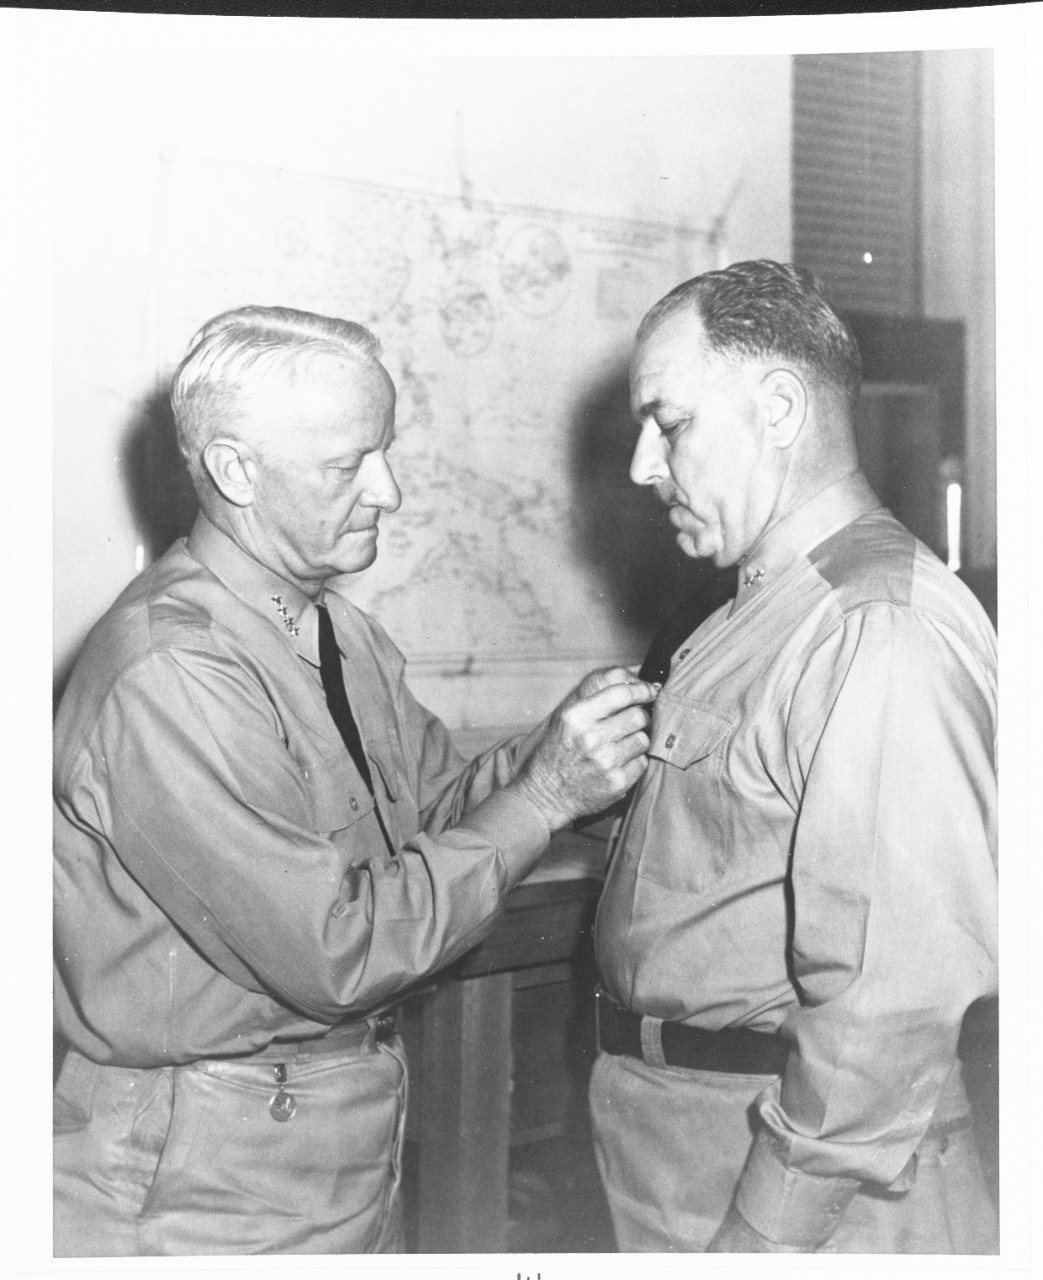 Admiral Chester W. Nimitz, USN, and Rear Admiral Mahlon S. Tisdale